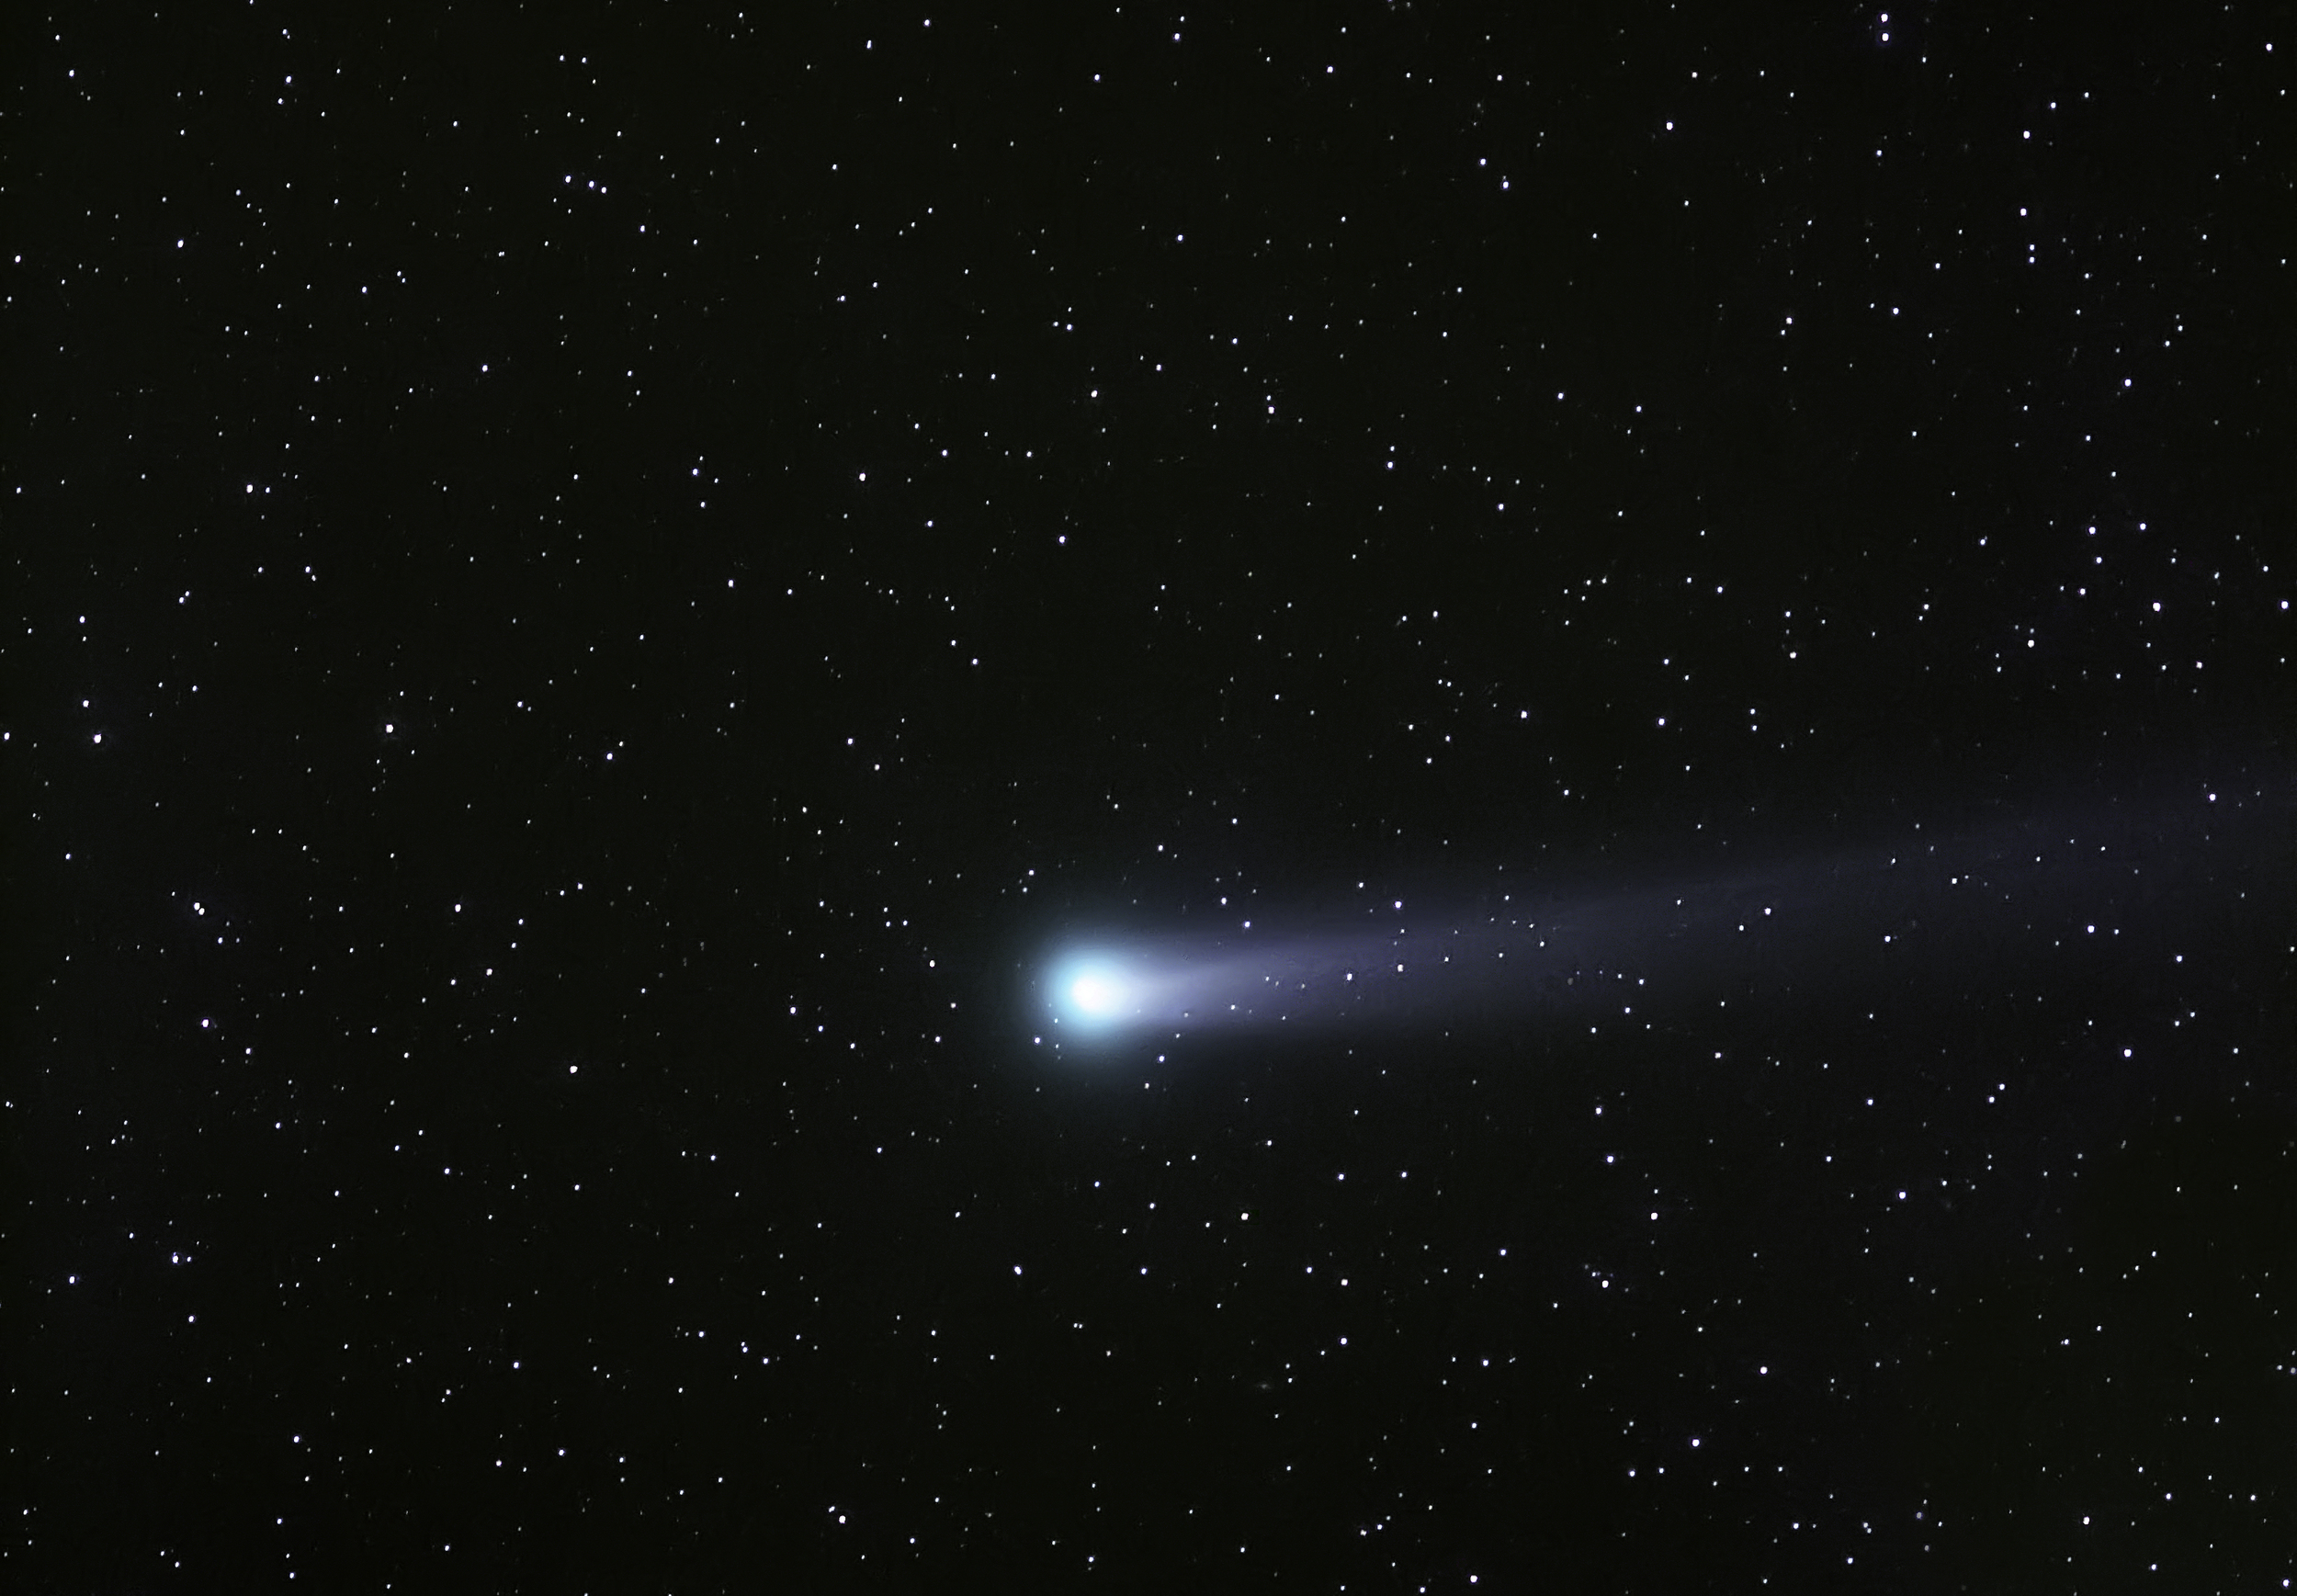   COMET LOVEJOY.&nbsp; January 5, 2014. &nbsp;I took this photo remotely from my home using my telescope in my observatory 75 miles away. &nbsp;It only took five years and countless dollars to buy the equipment and figure out how to do this. &nbsp; 